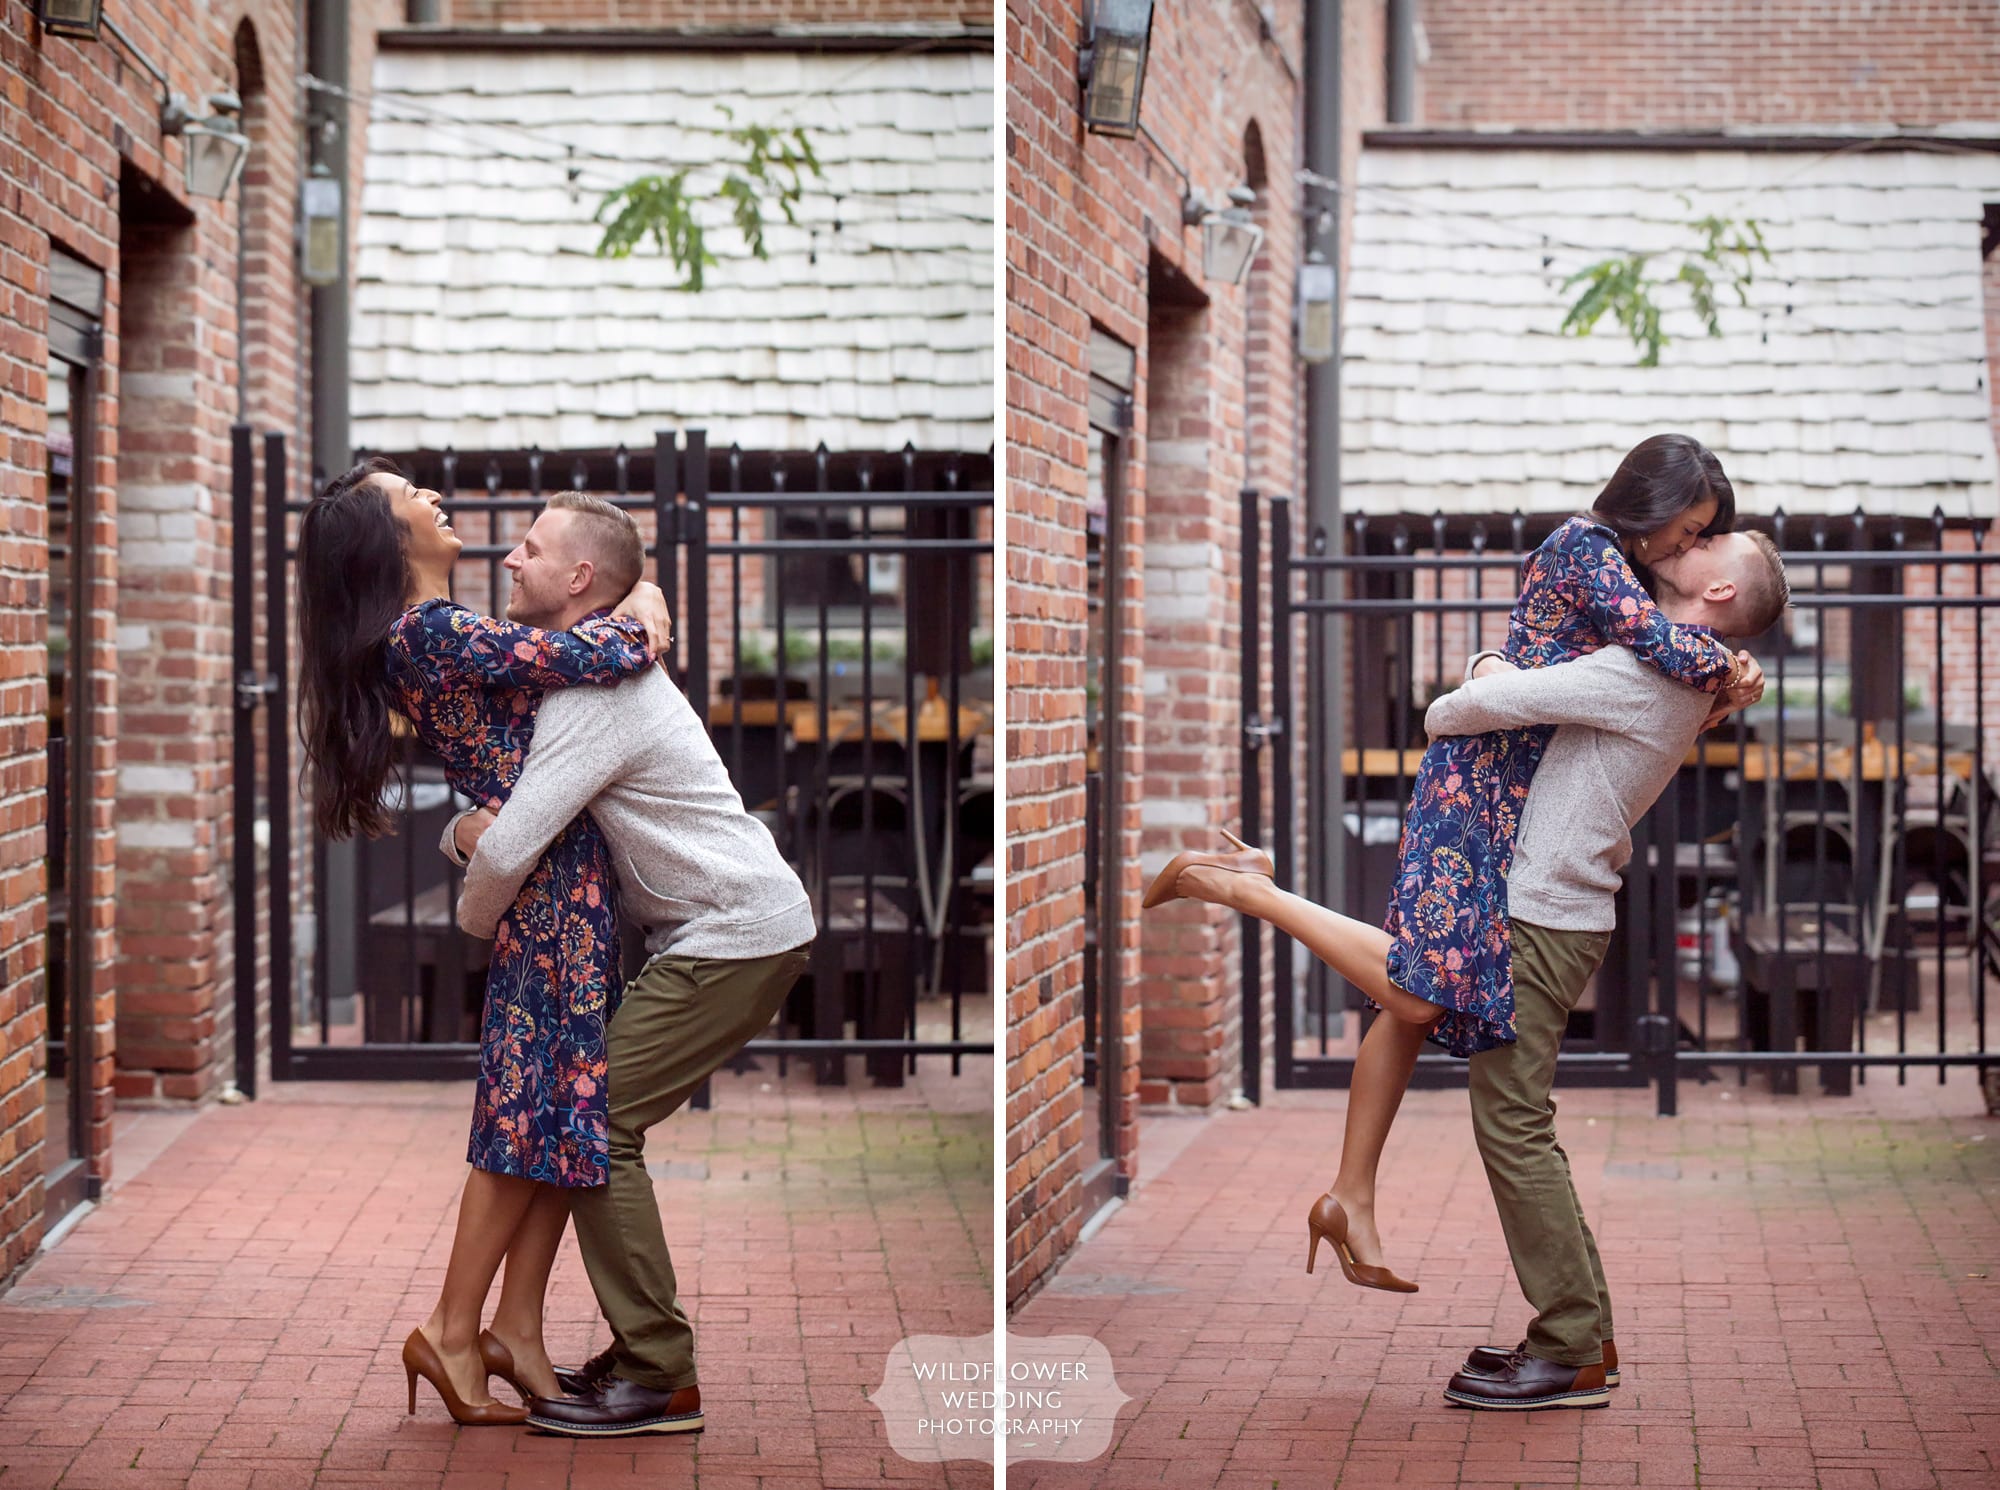 Fun and happy engagement photos in downtown Columbia, MO.